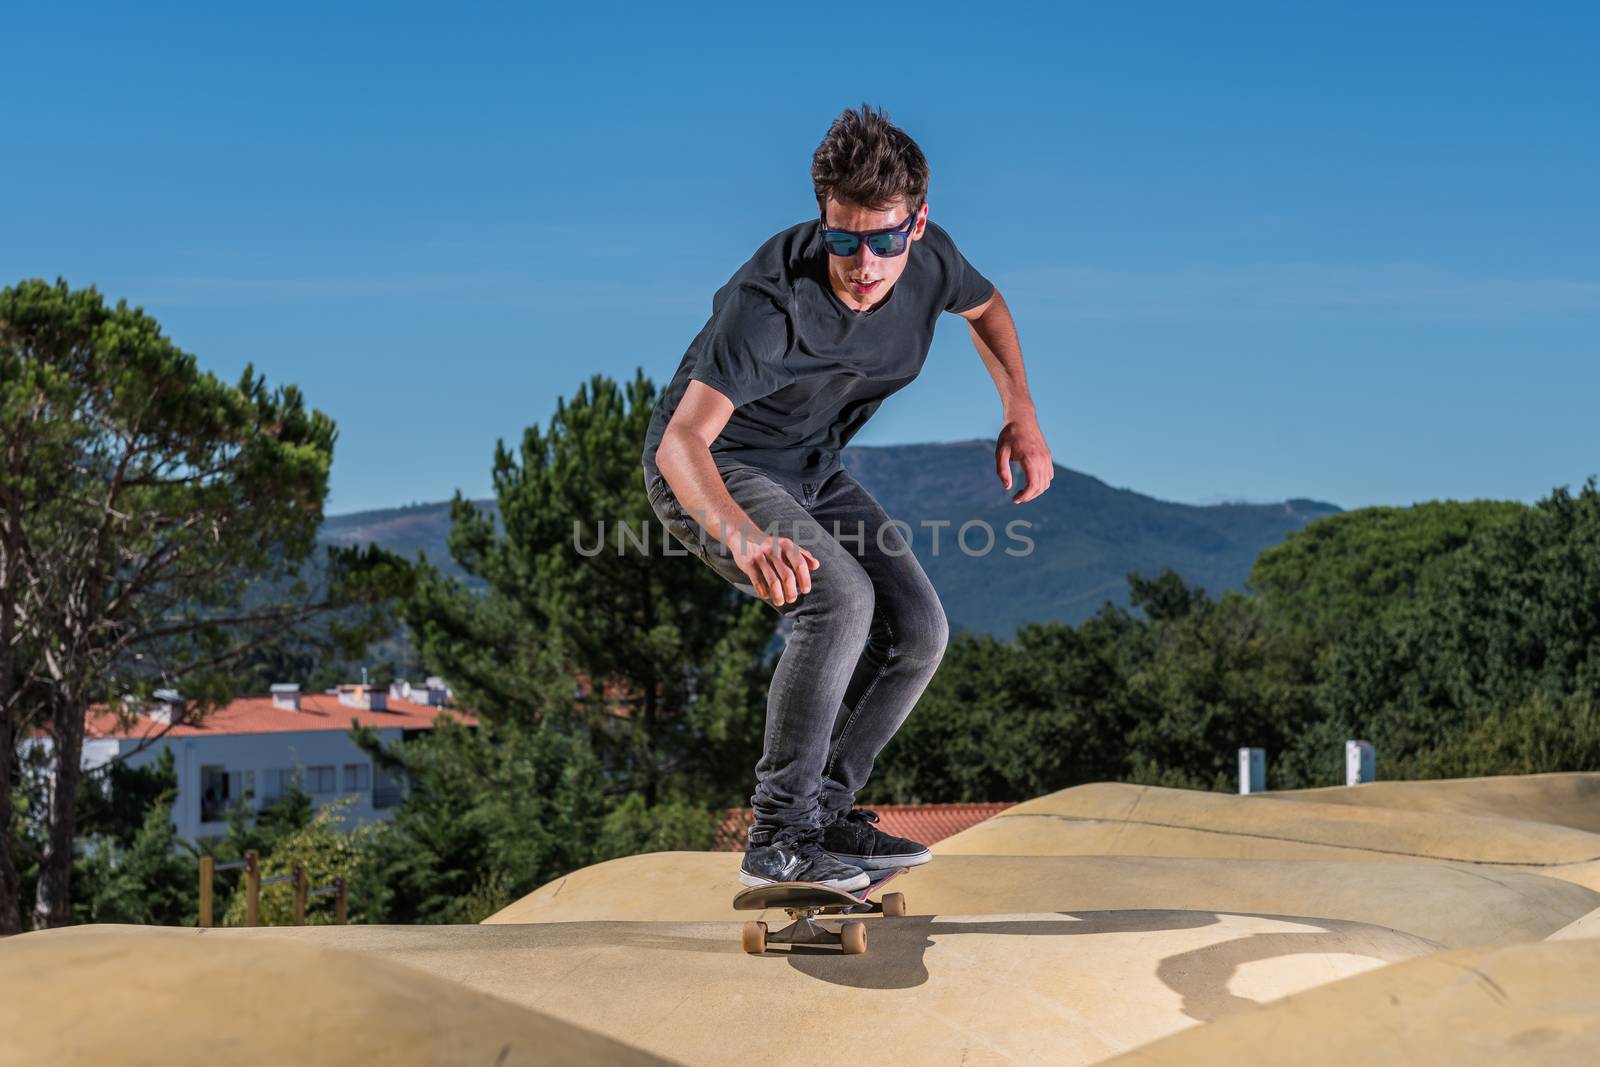 Skateboarder practice on a pump track park on a sunny summer day.